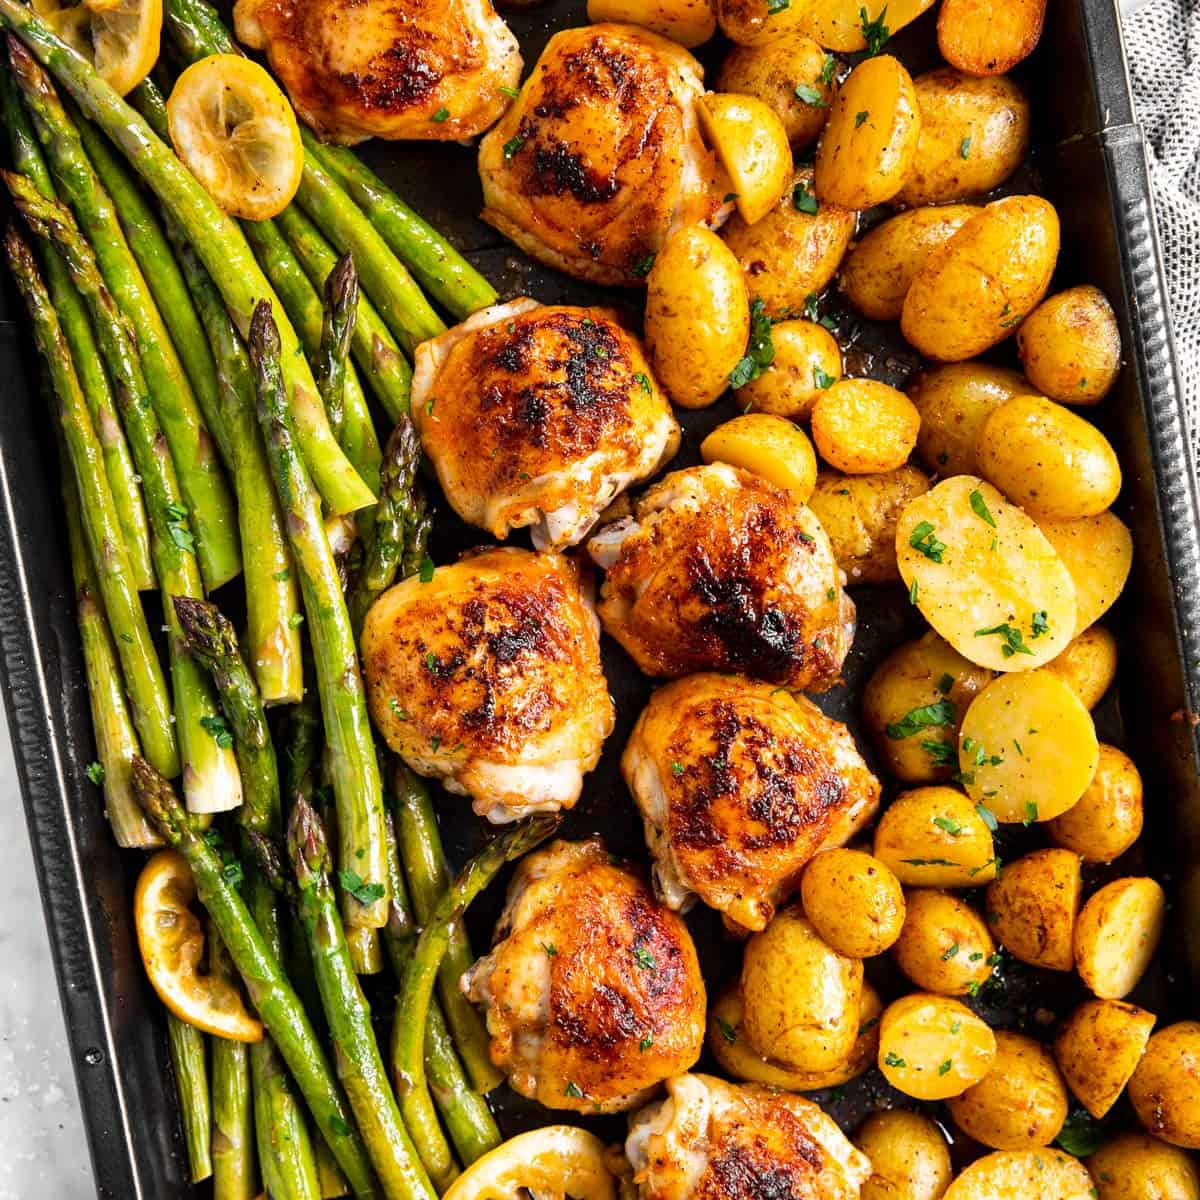 https://www.savorynothings.com/wp-content/uploads/2021/04/chicken-and-asparagus-sheet-pan-dinner-image-sq.jpg